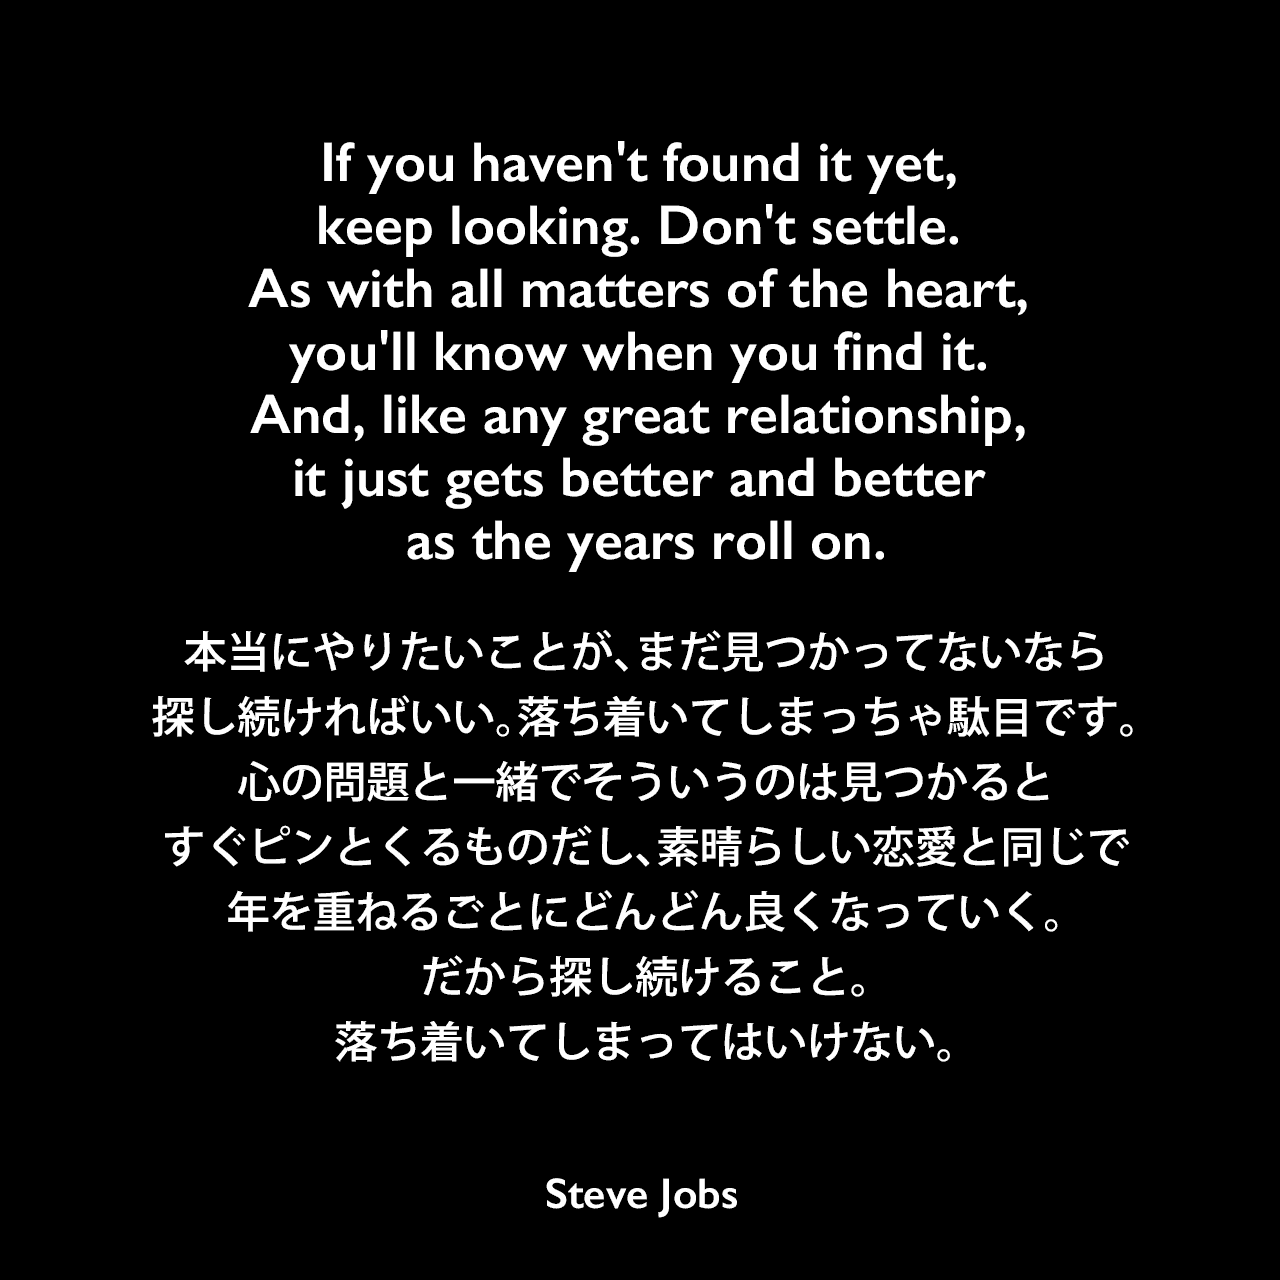 If you haven't found it yet, keep looking. Don't settle. As with all matters of the heart, you'll know when you find it. And, like any great relationship, it just gets better and better as the years roll on.本当にやりたいことが、まだ見つかってないなら探し続ければいい。落ち着いてしまっちゃ駄目です。心の問題と一緒でそういうのは見つかるとすぐピンとくるものだし、素晴らしい恋愛と同じで年を重ねるごとにどんどん良くなっていく。だから探し続けること。落ち着いてしまってはいけない。- 2005年6月12日 スタンフォード大学卒業式でのスピーチよりSteve Jobs